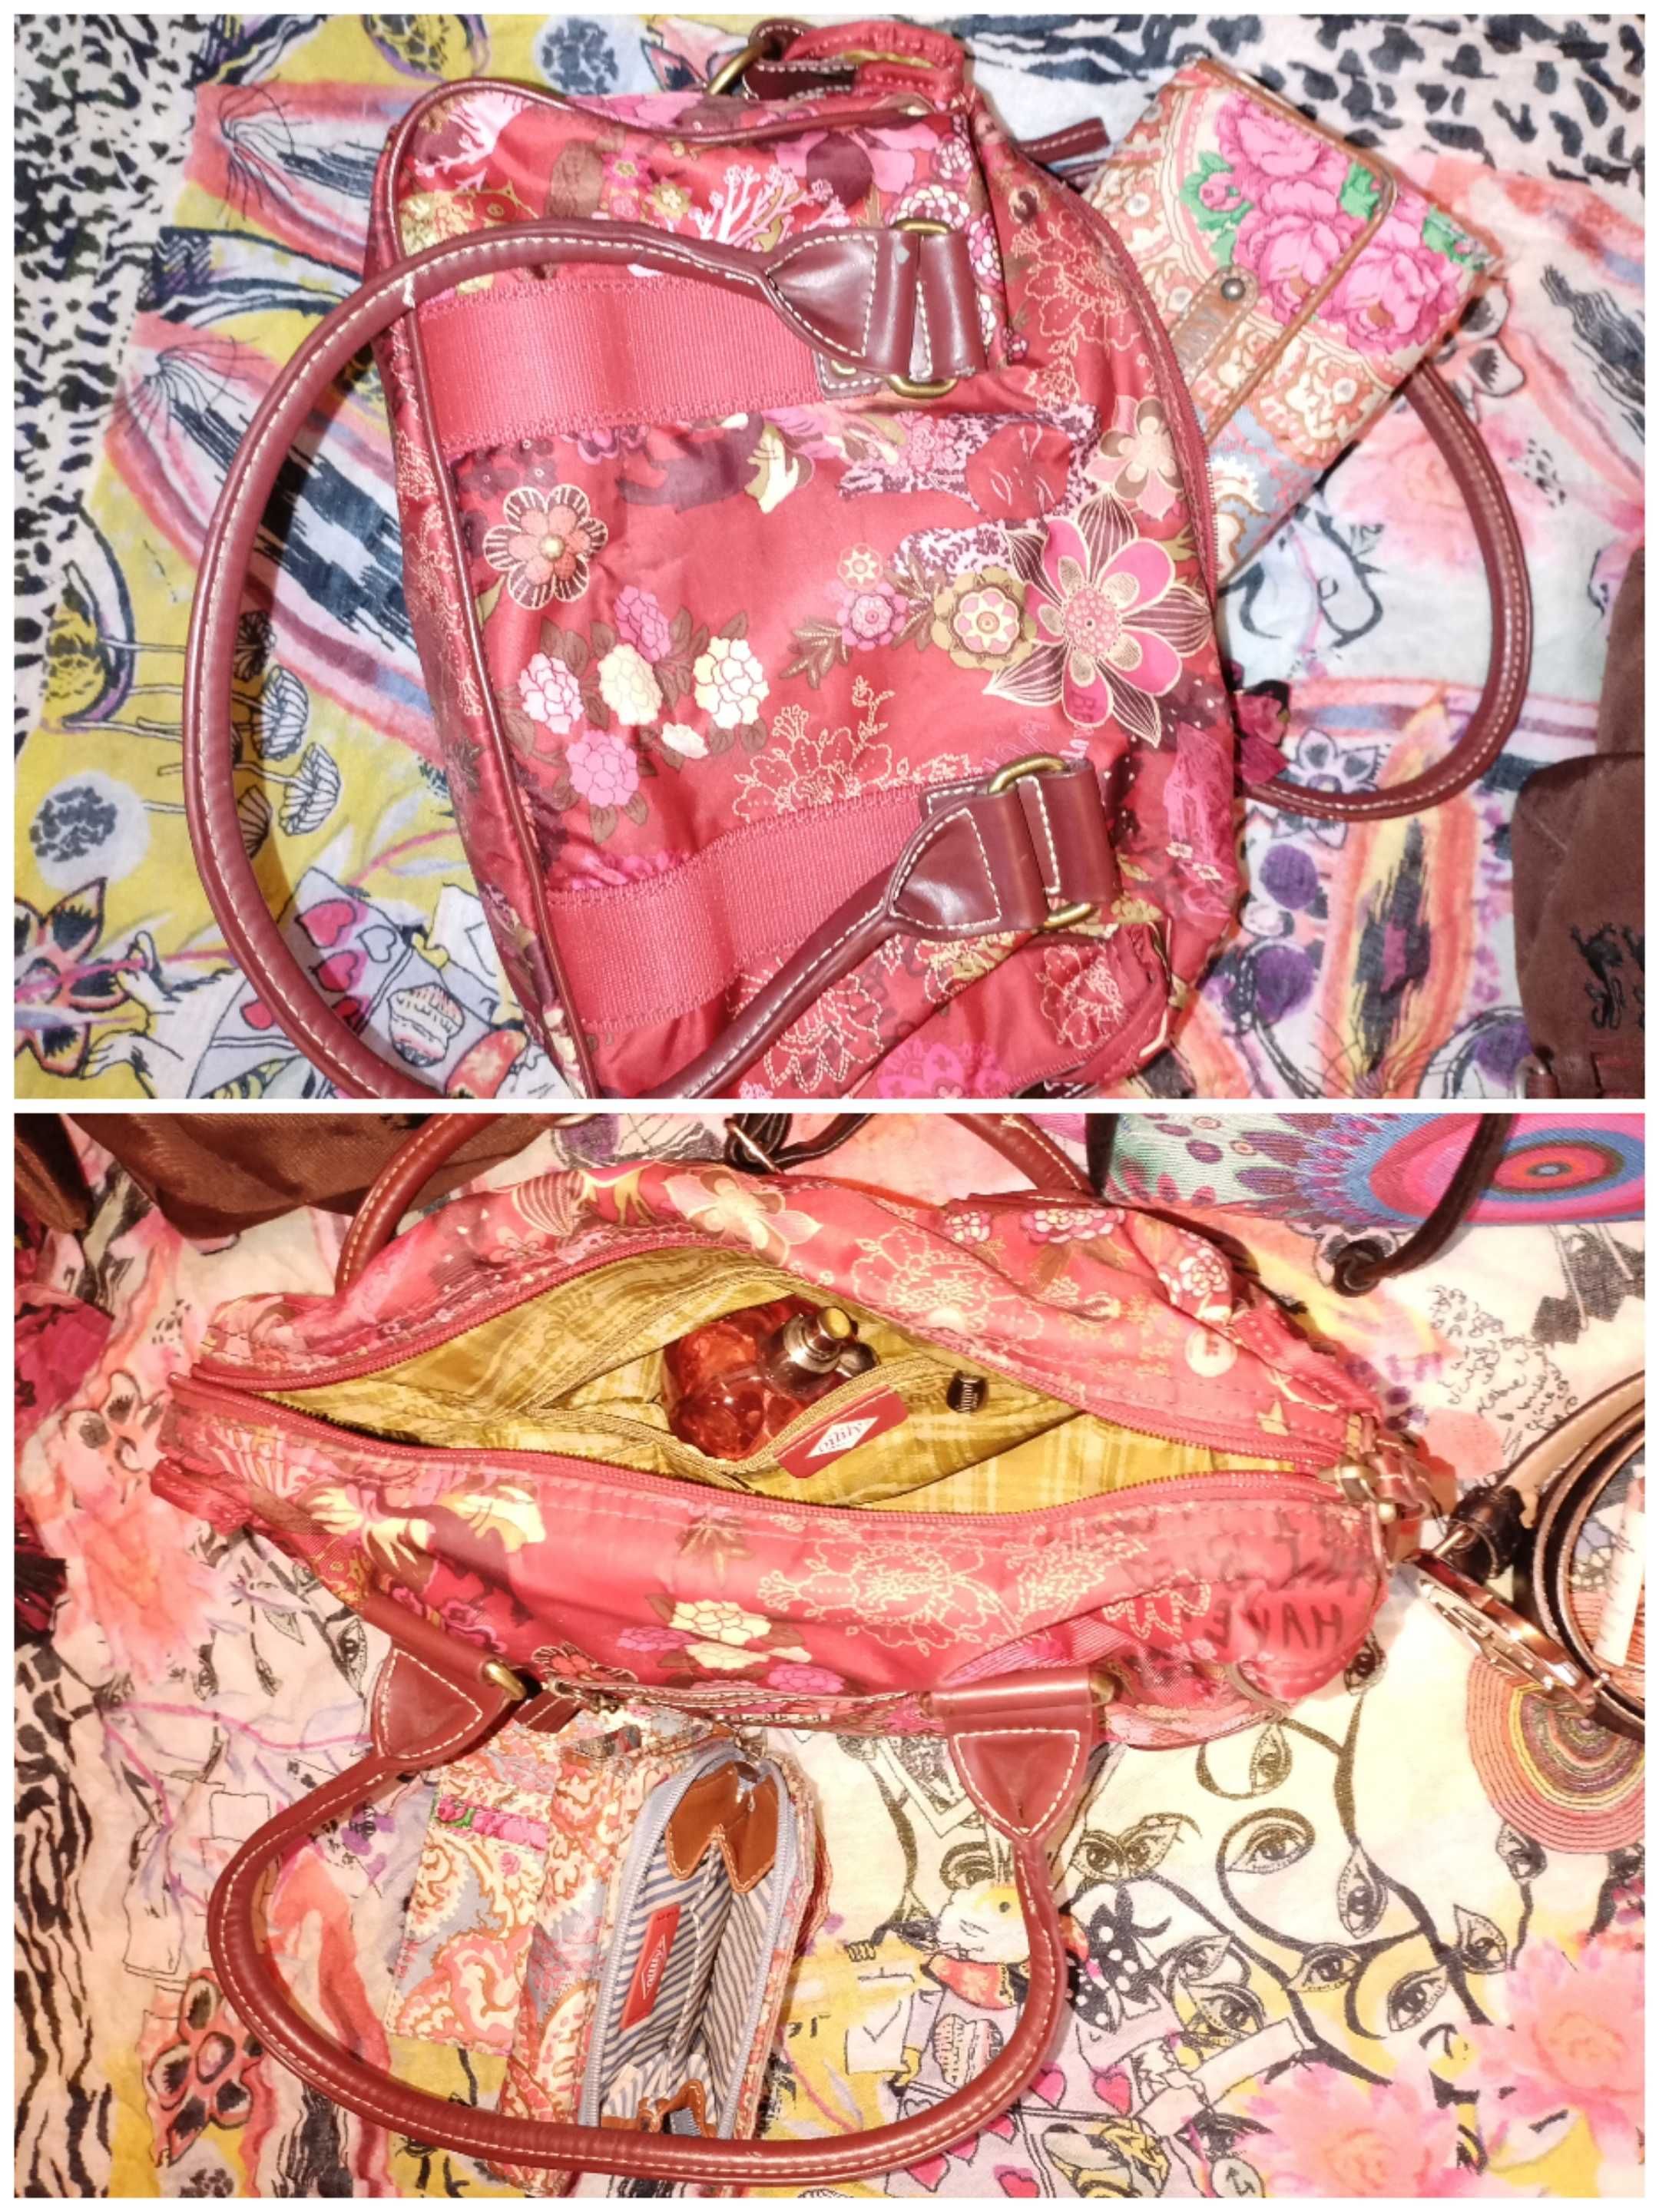 George Gina&Lucy, Oilily, Desigual